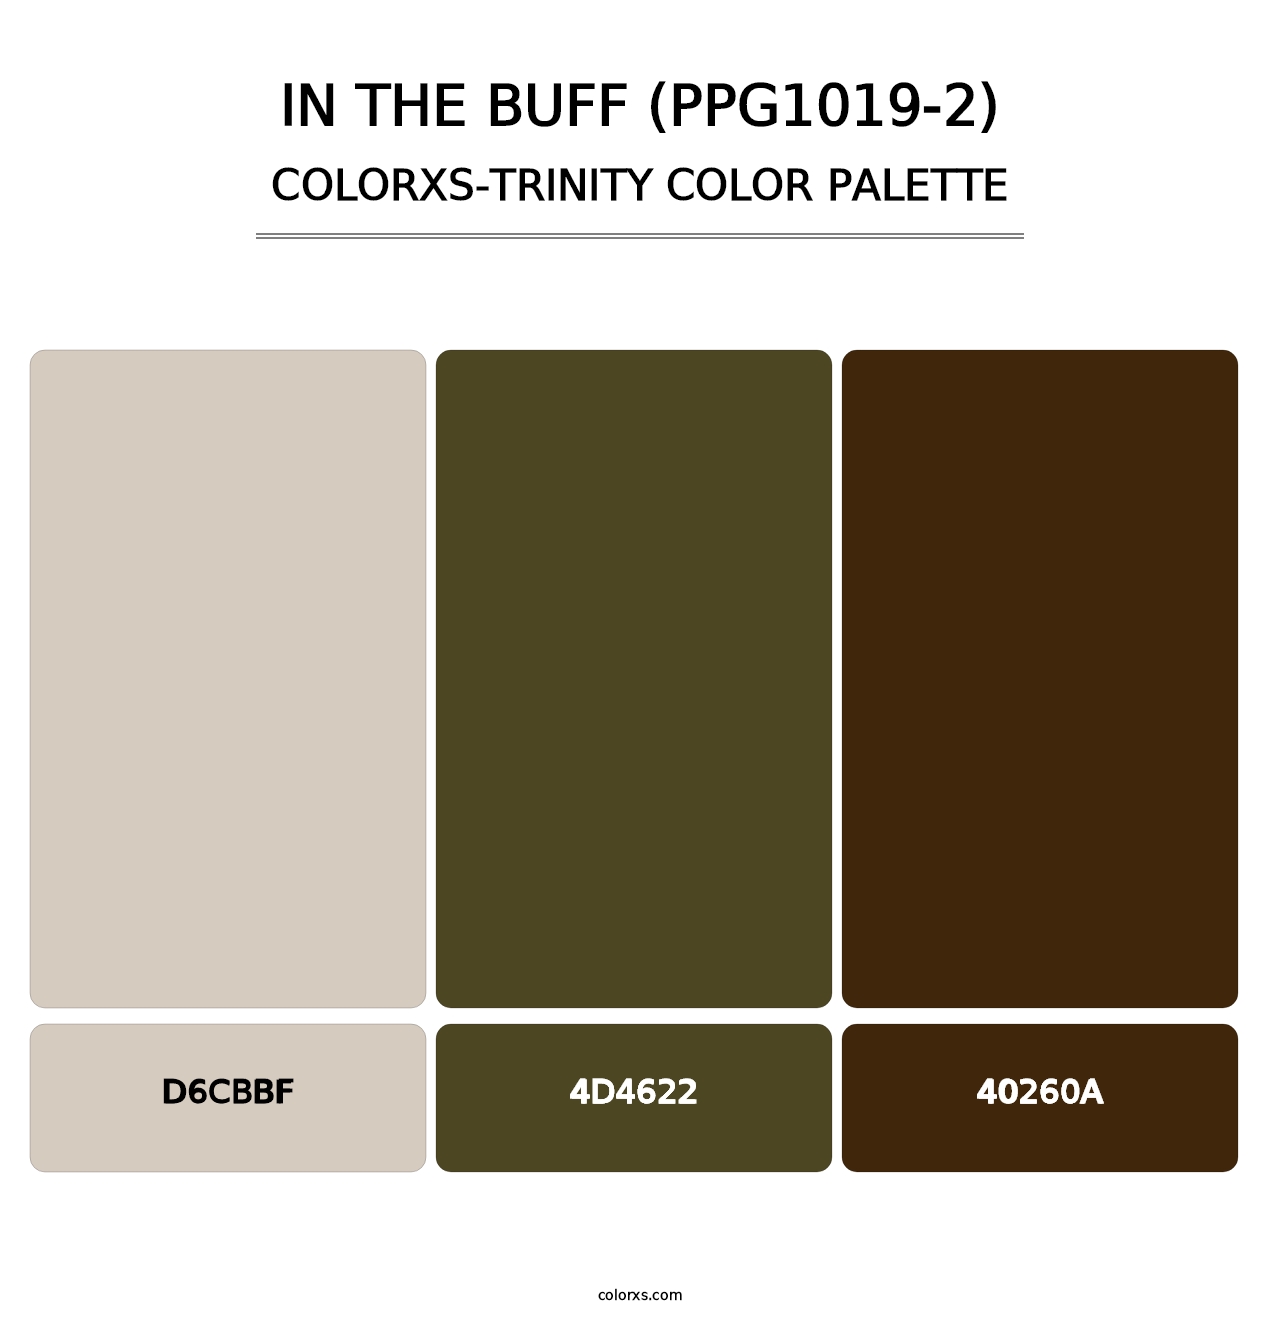 In The Buff (PPG1019-2) - Colorxs Trinity Palette